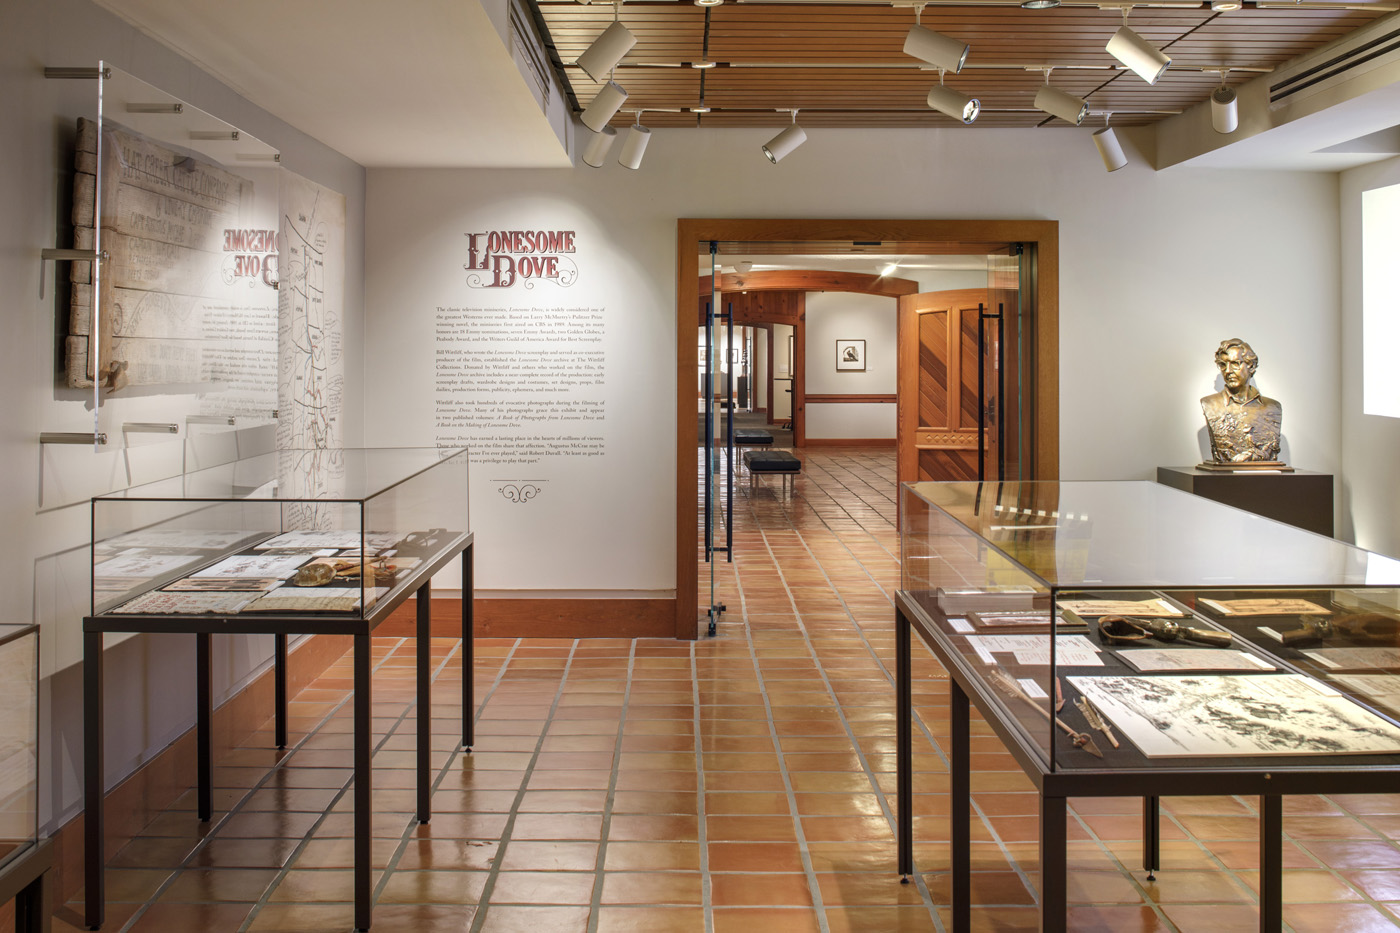 Exhibit room with two glass displays and Writing on the wall that is titles 